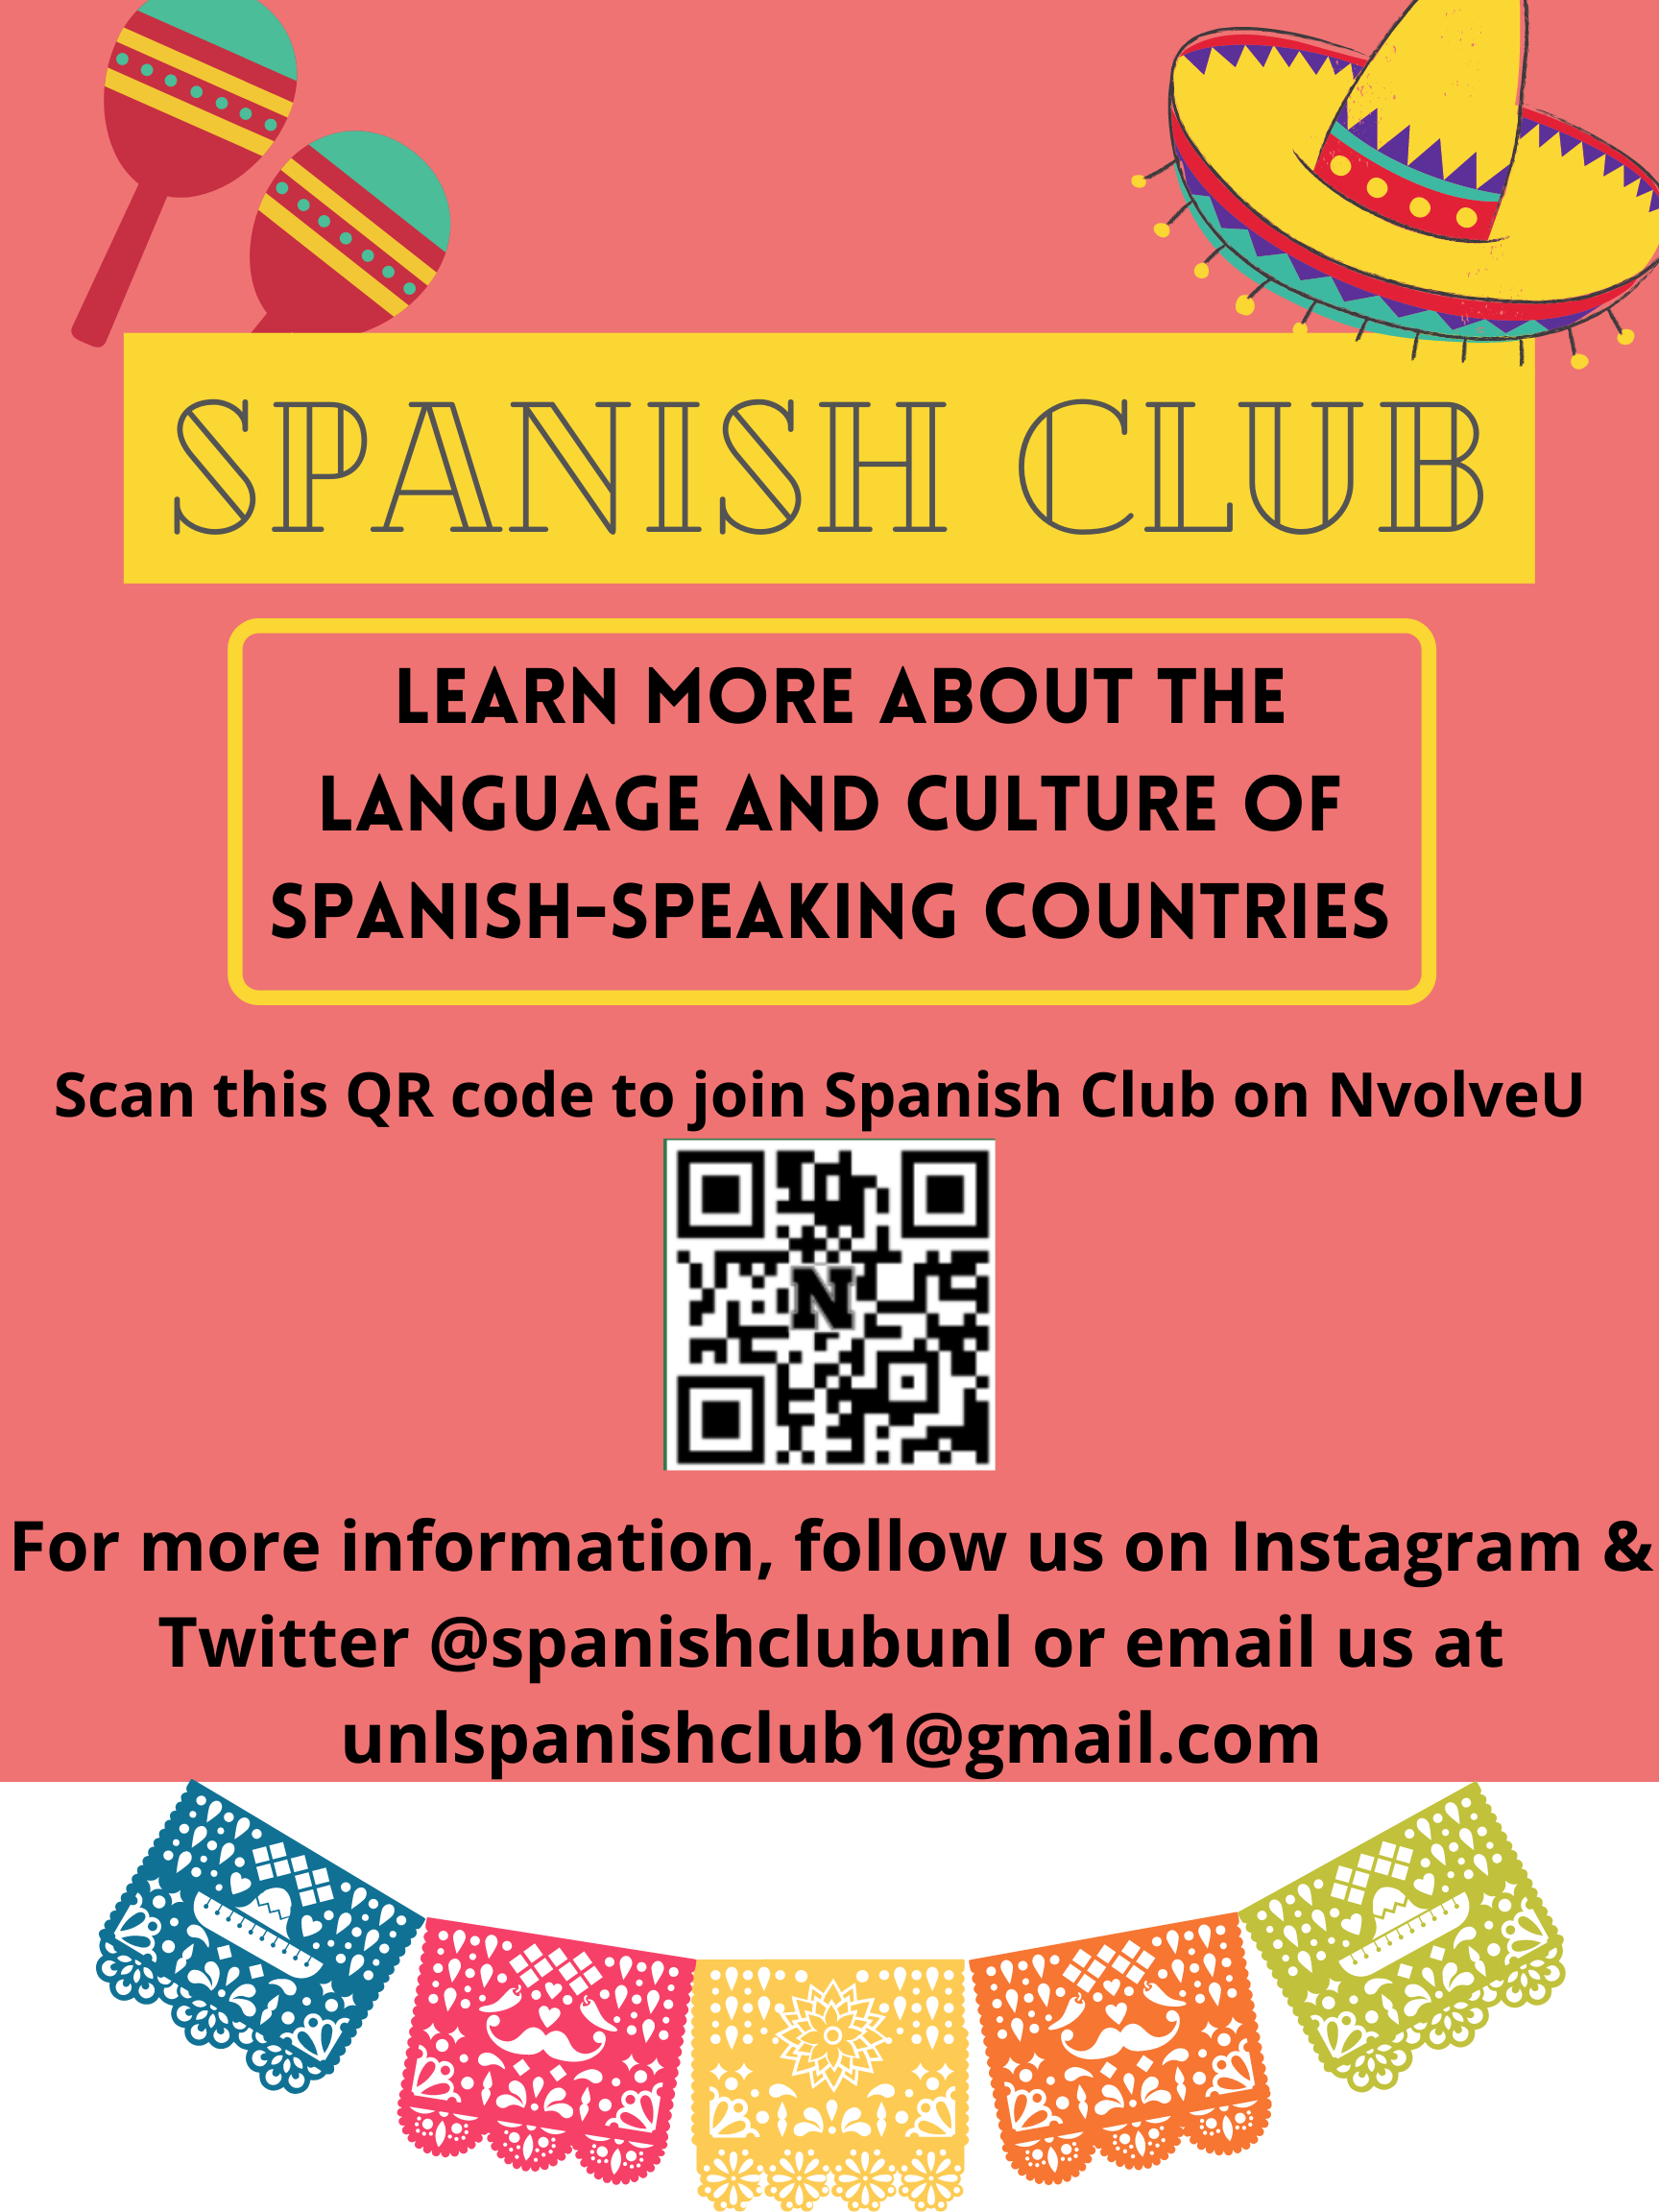 Check out Spanish Club!